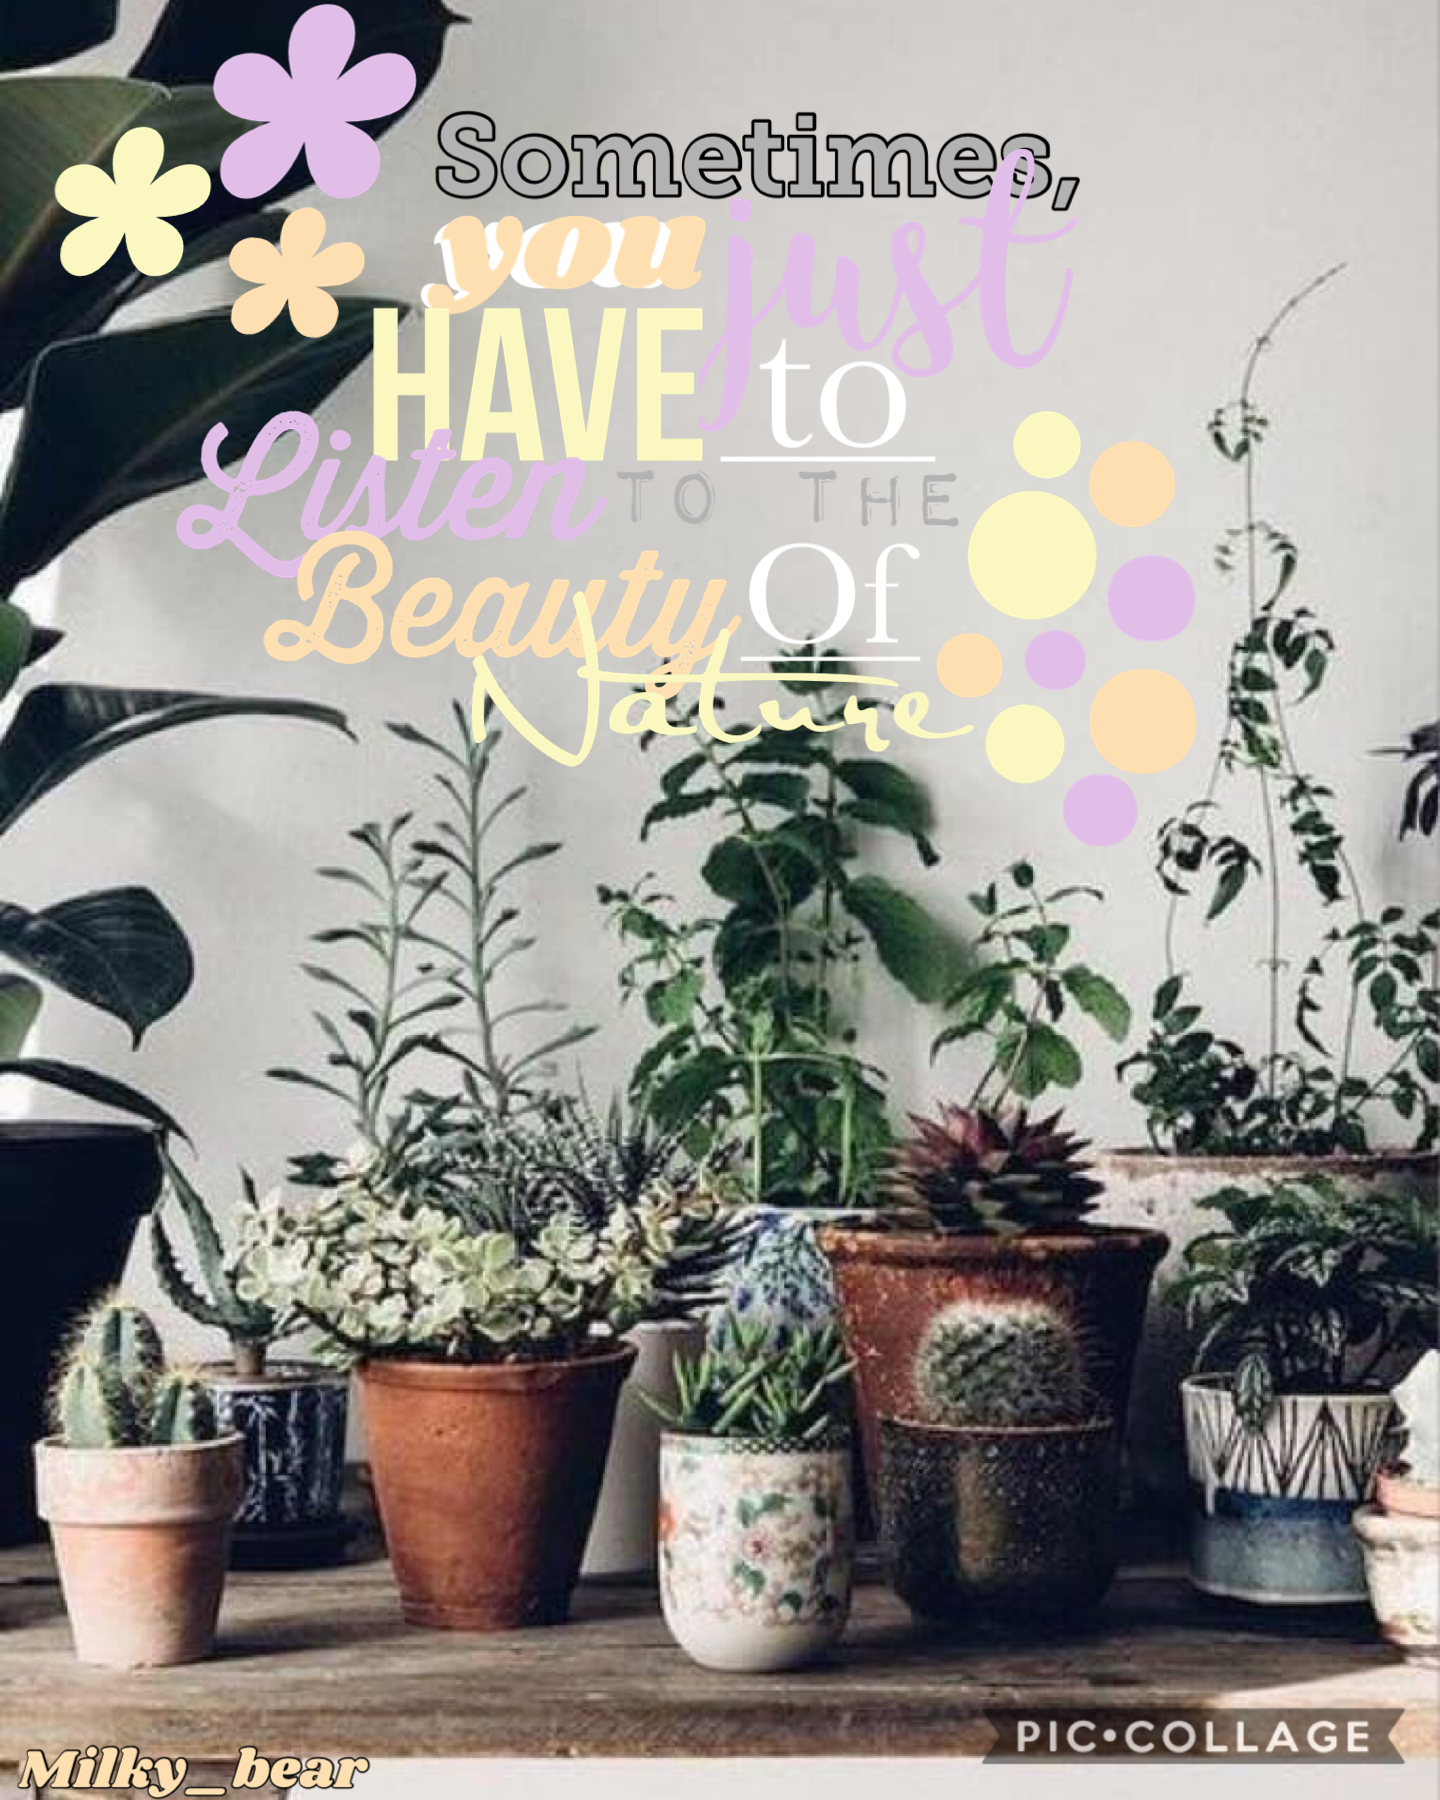 🦠 TAP 🦠 
How is everyone, my school got closed today and I’m sad ☹️ I also like succulents I’ve been liking them allot also I feel bad about this collage cause I kinda copied but lots of credit goes to to iicorgidreams I think that’s her username I forgot